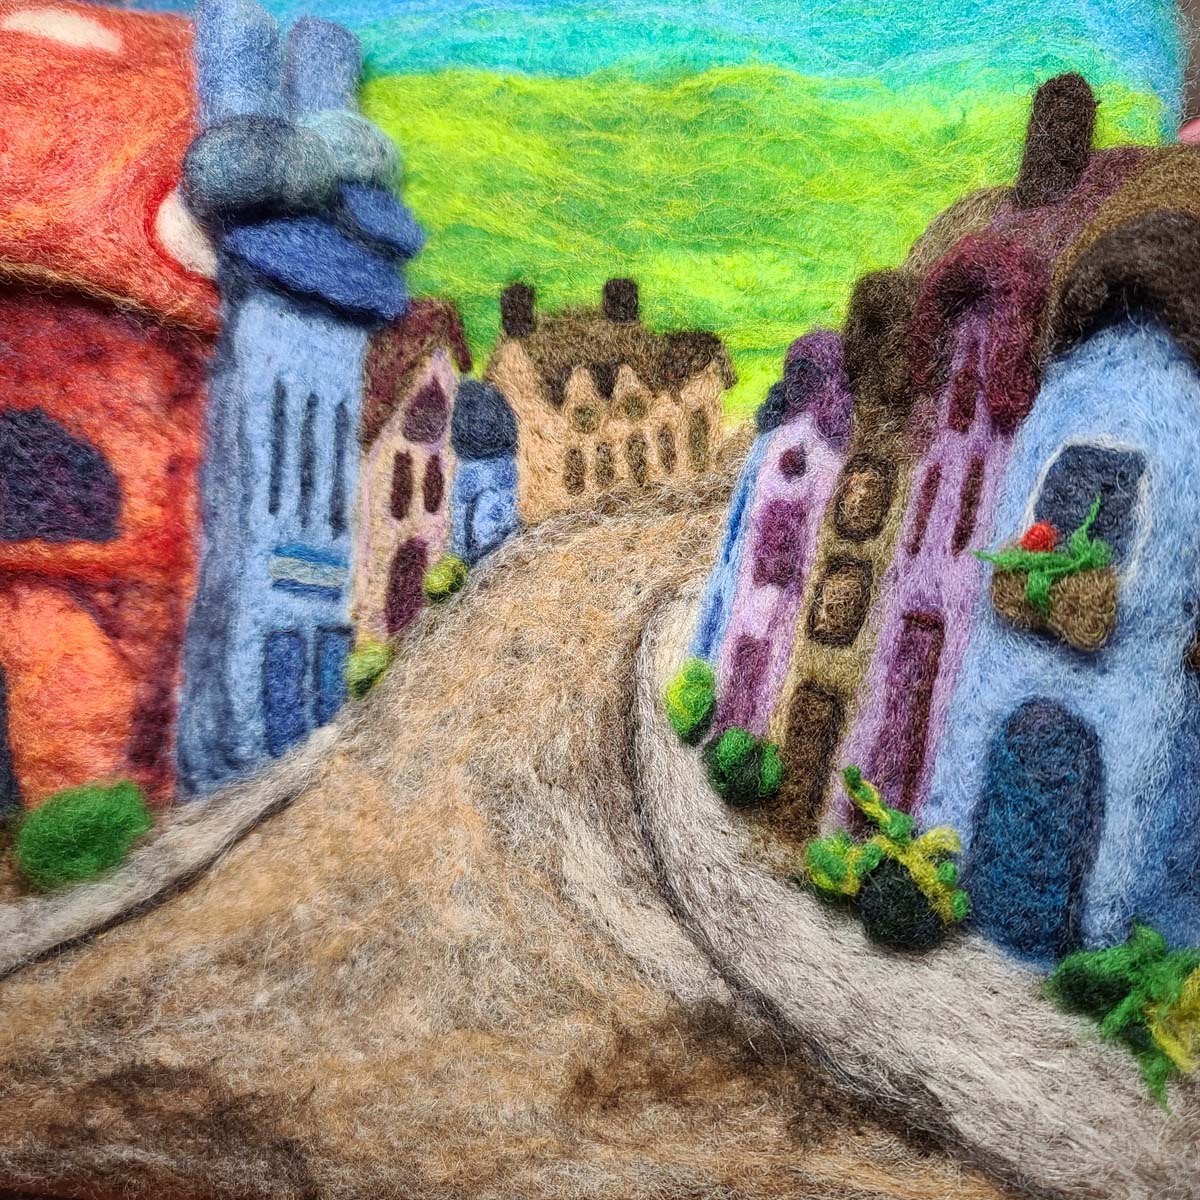 Needle felted village street with plants and planters along the street